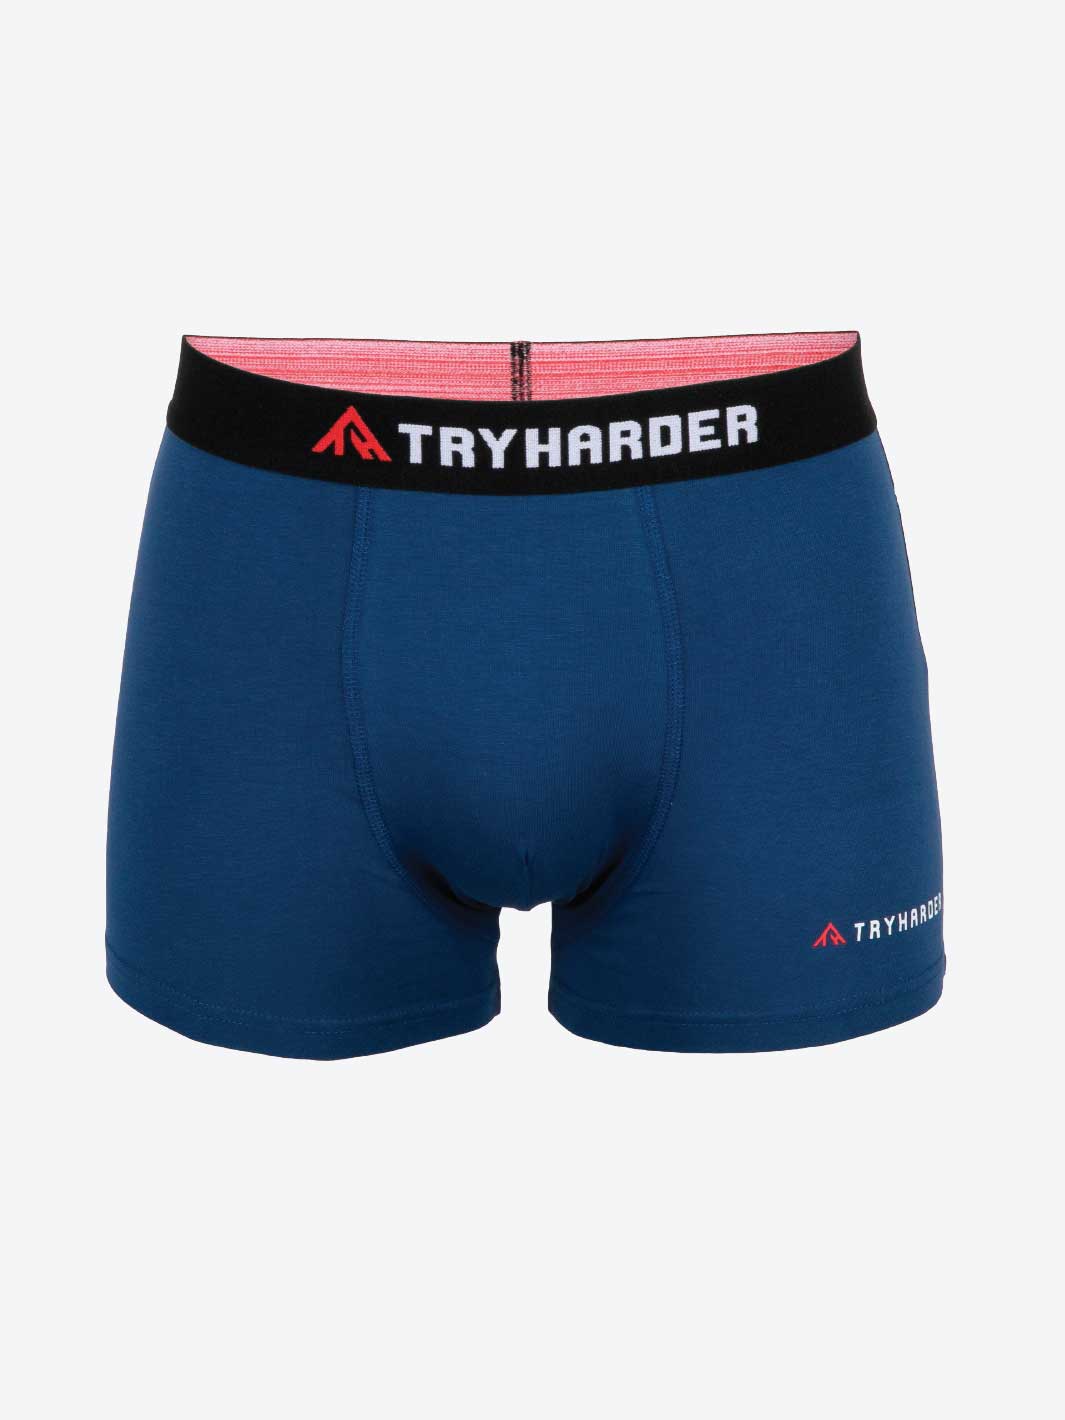 TRYHARDER - Boxer - Blue 1 pack